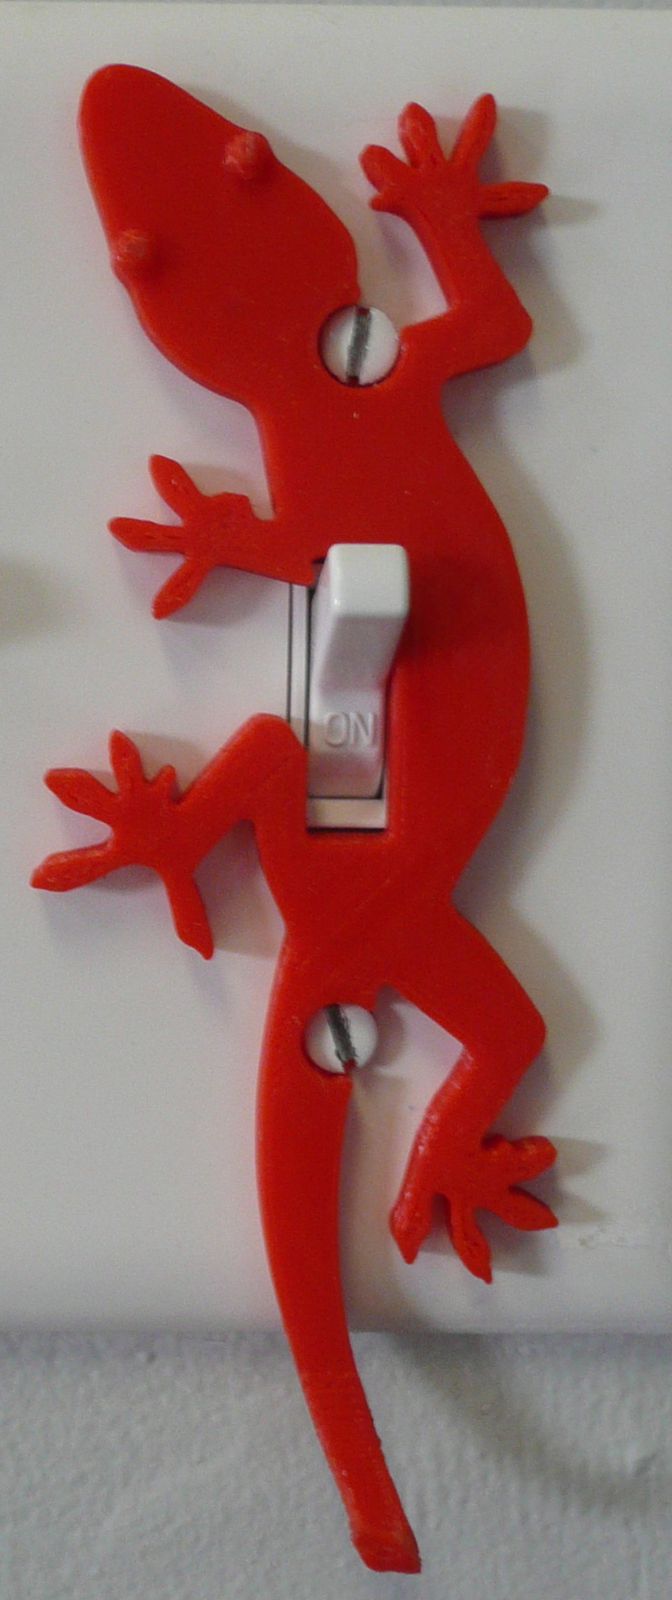 Lizard Gecko Light Switch Cover Decor With Hook For Keys Made in USA PR34